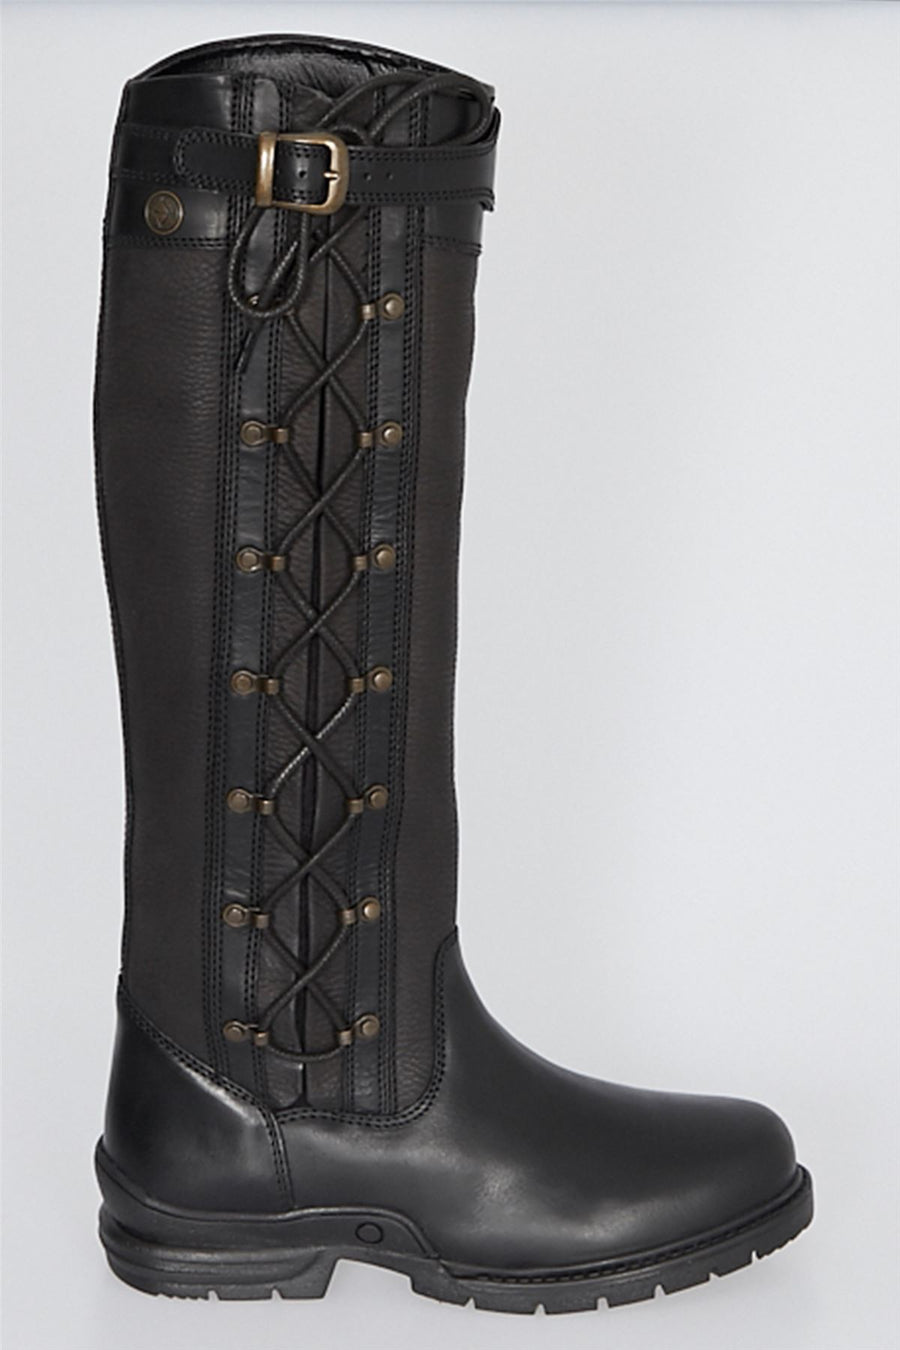 Bow & Arrow Kingston Country Boots BLACK